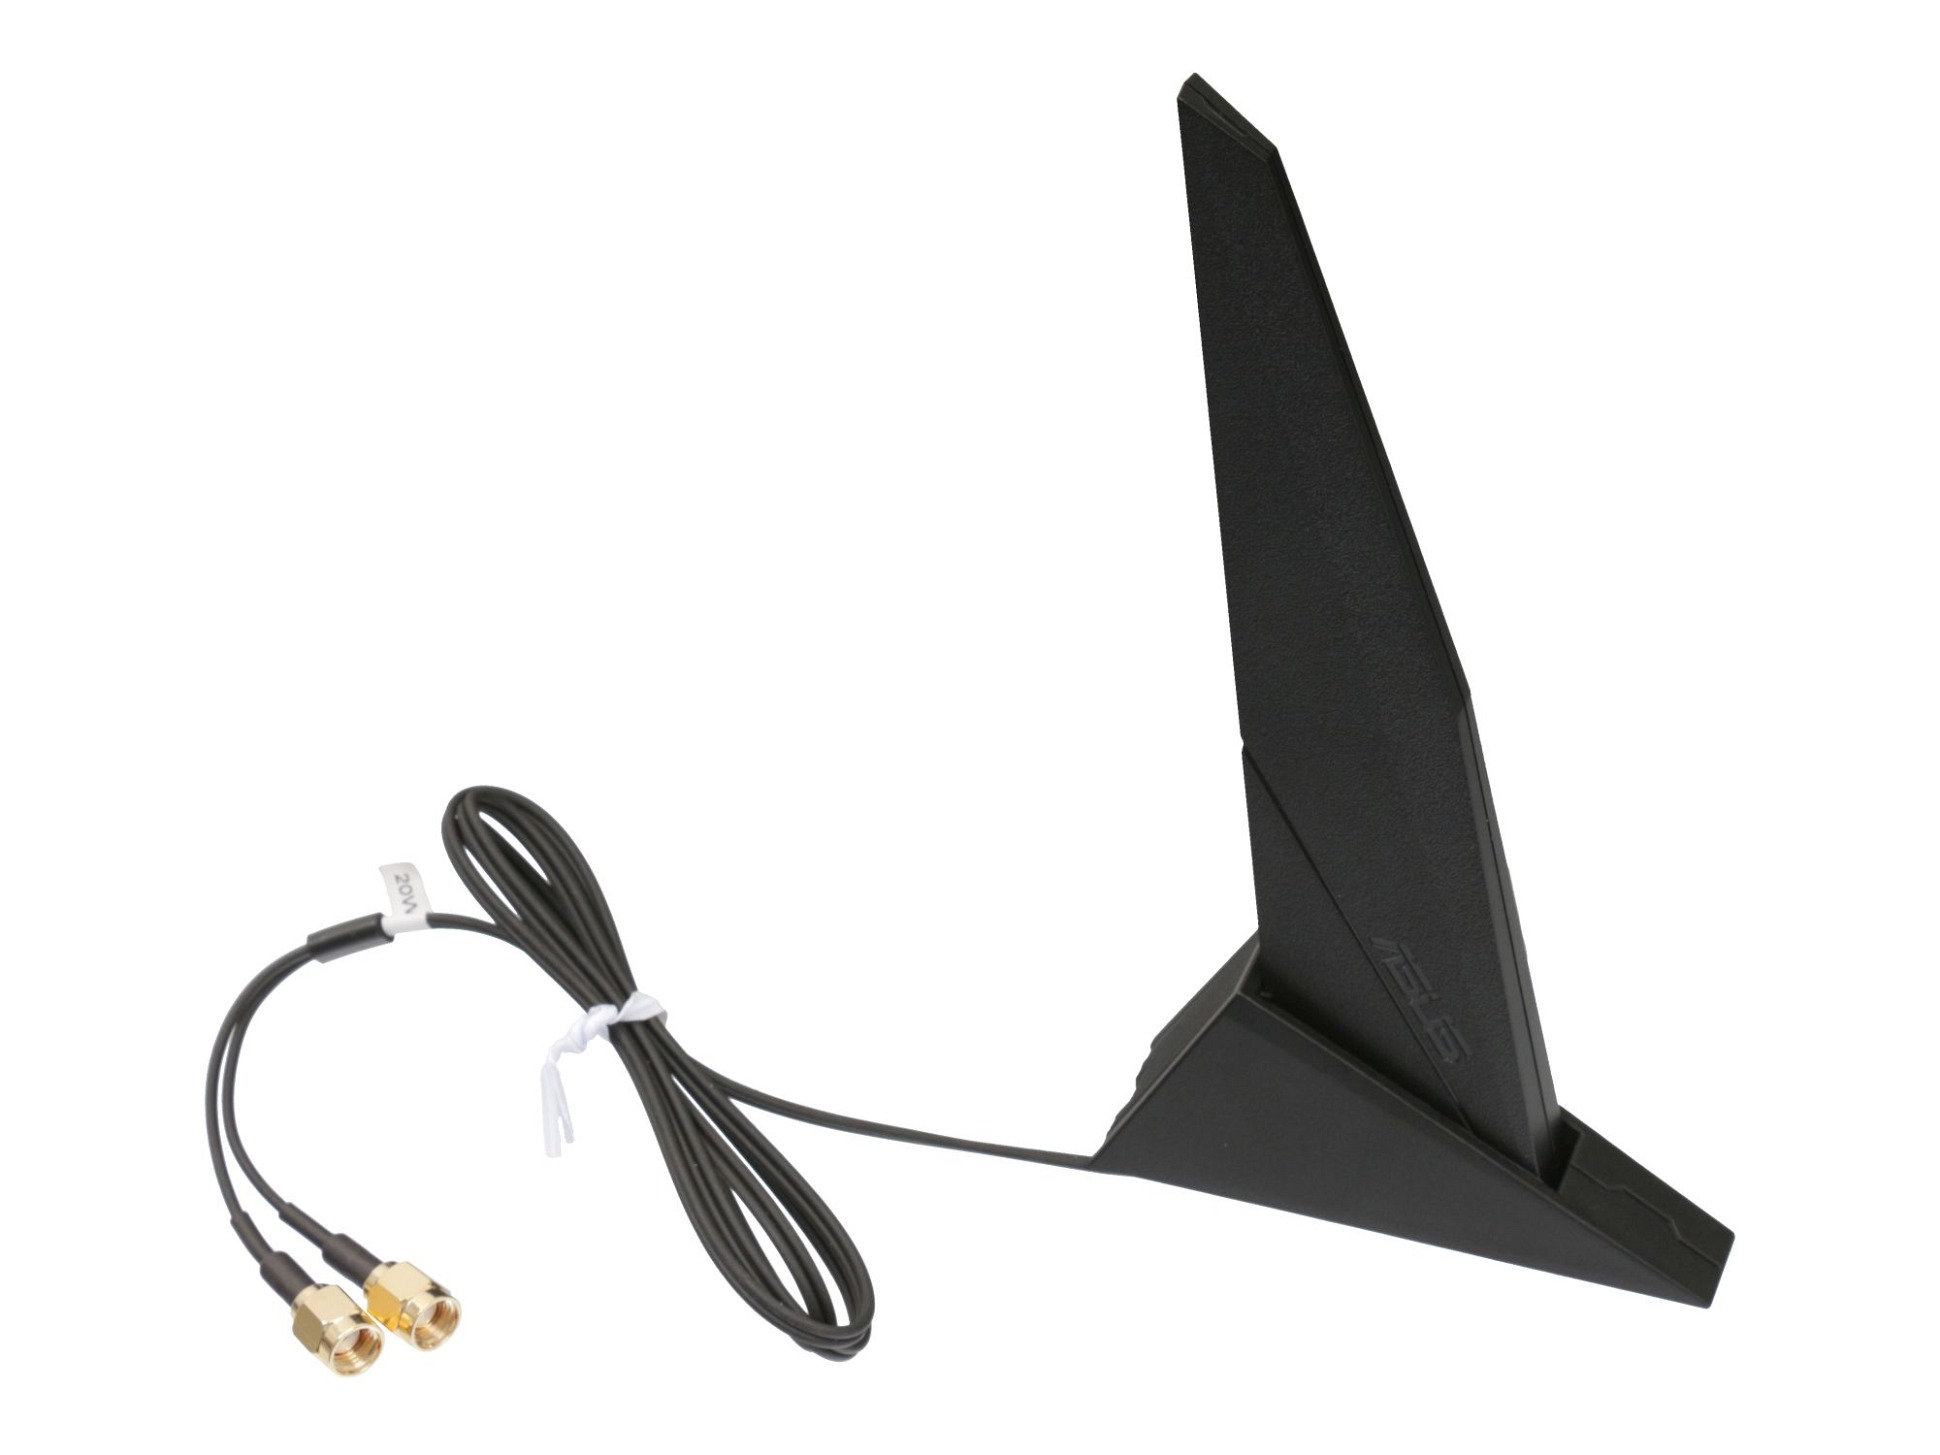 Externe Asus RP-SMA DIPOLE Antenne für Asus ROG Strix B550-XE GAMING WIFI